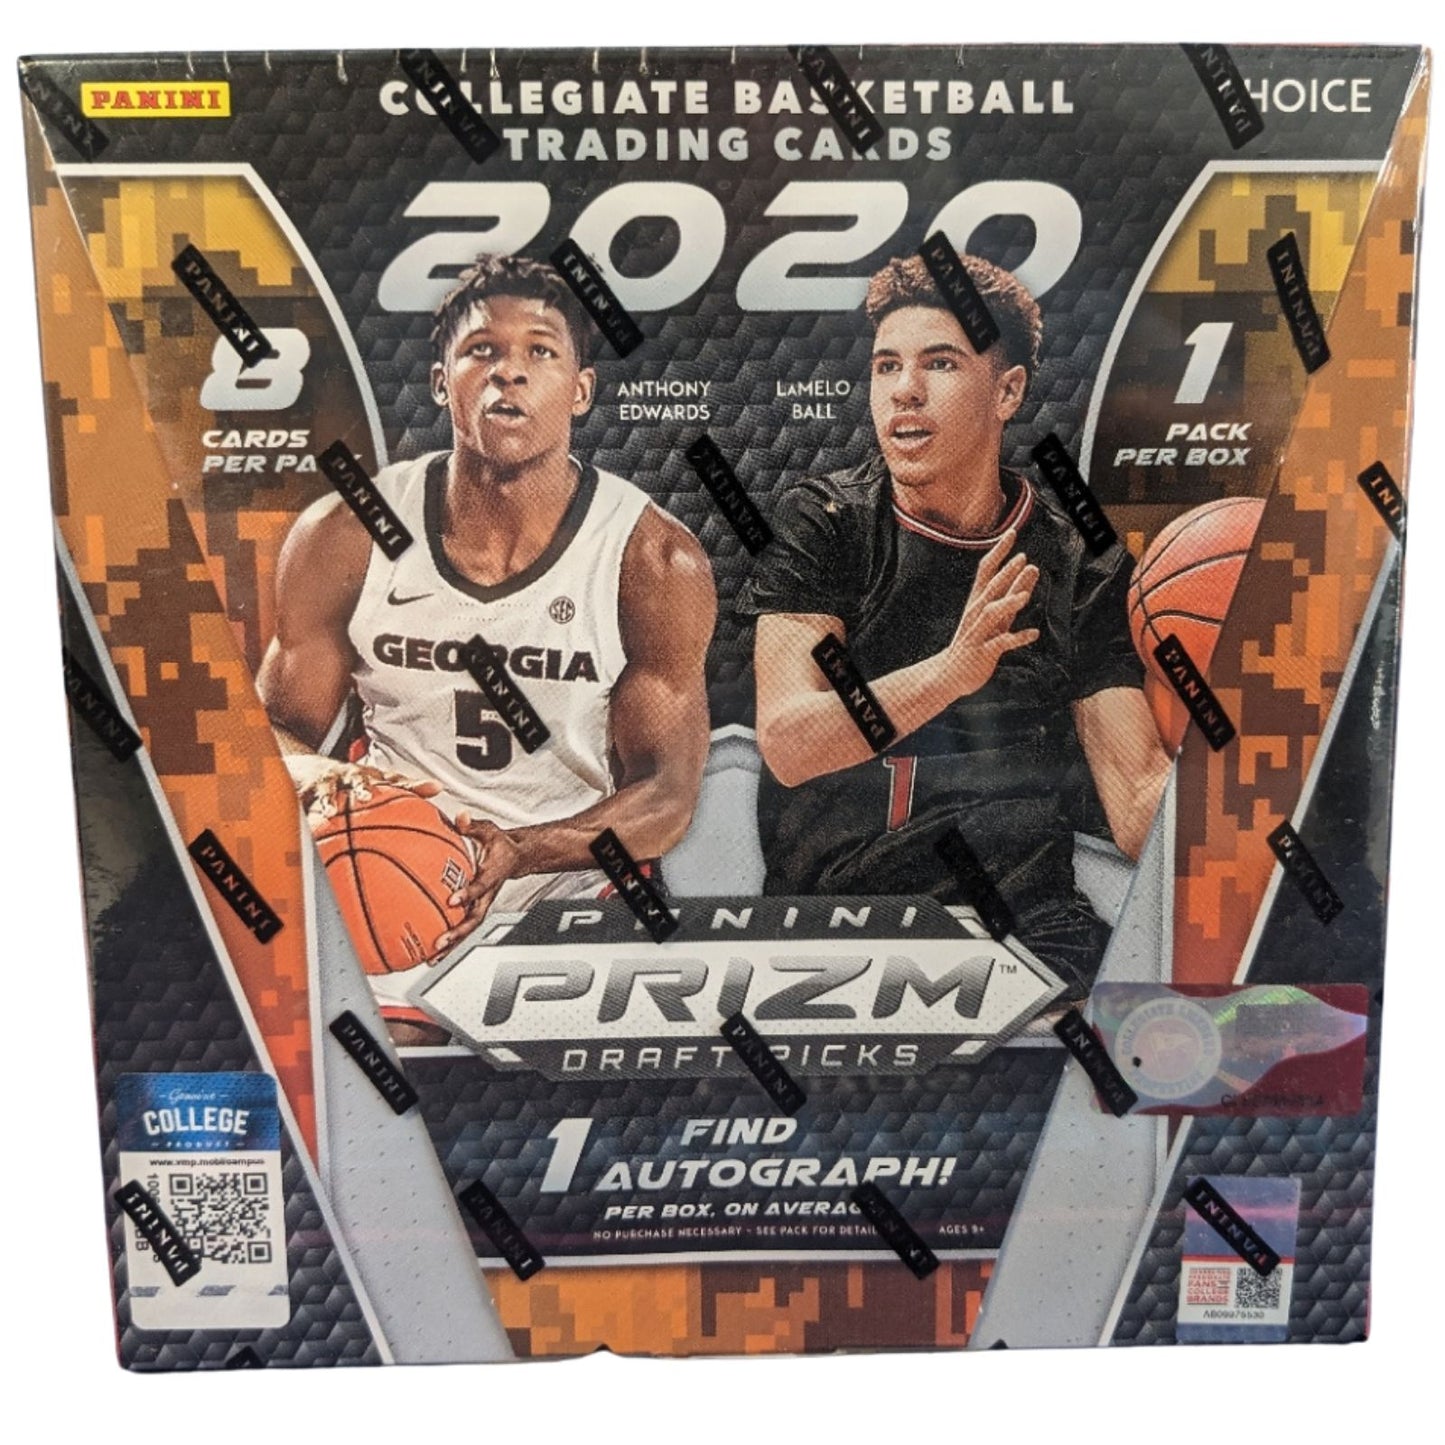 Sealed box of NBA Prizm draft picks cards from 2020